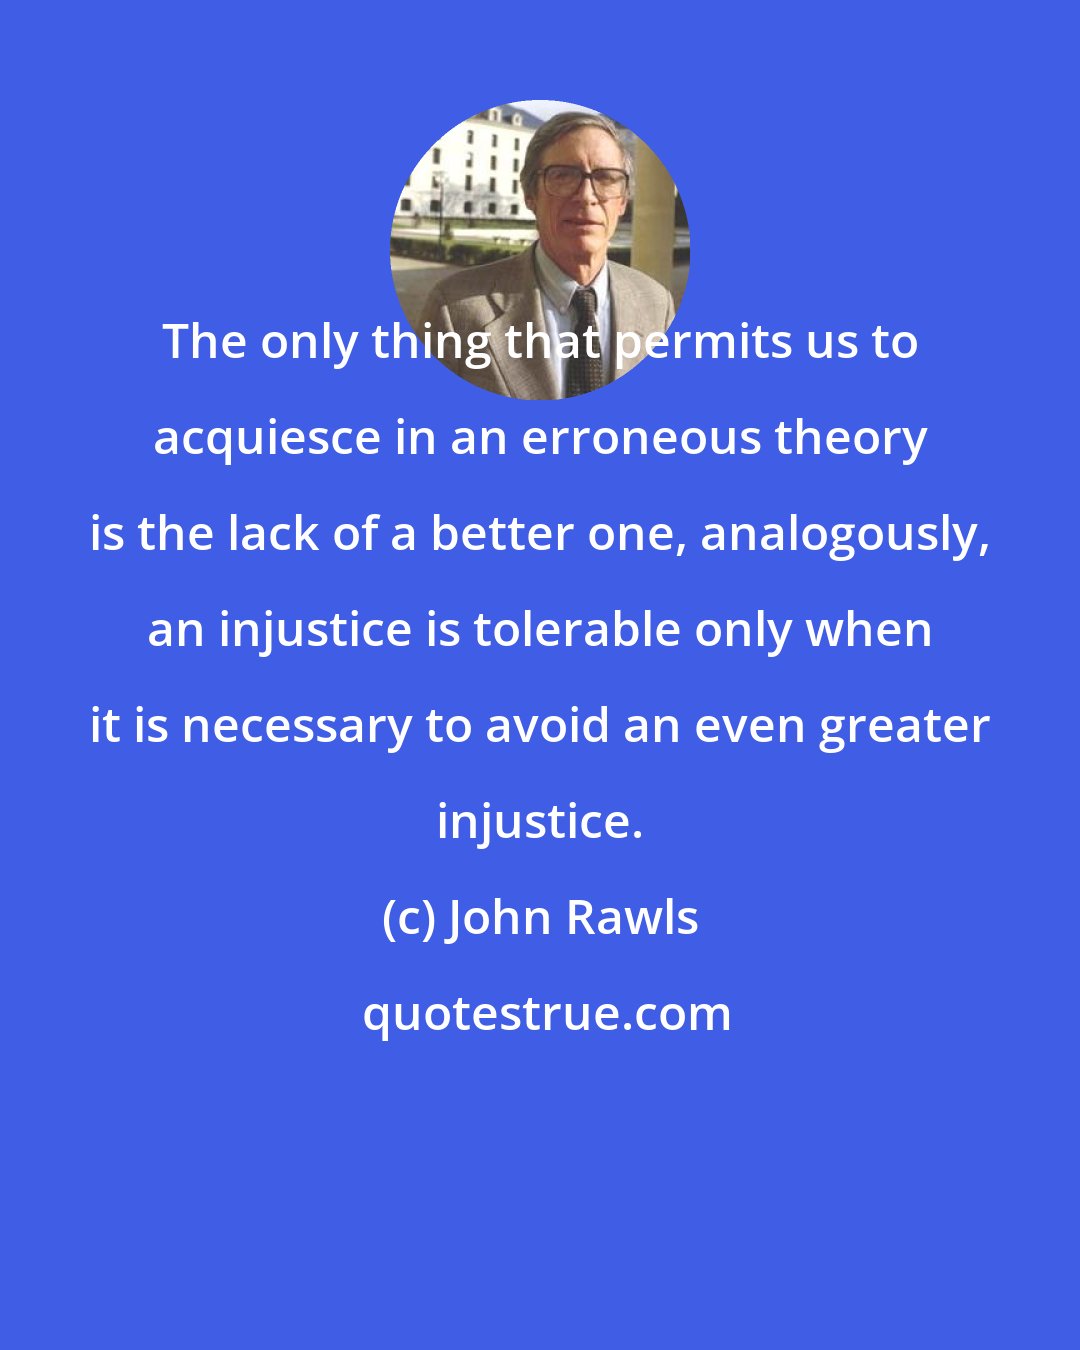 John Rawls: The only thing that permits us to acquiesce in an erroneous theory is the lack of a better one, analogously, an injustice is tolerable only when it is necessary to avoid an even greater injustice.